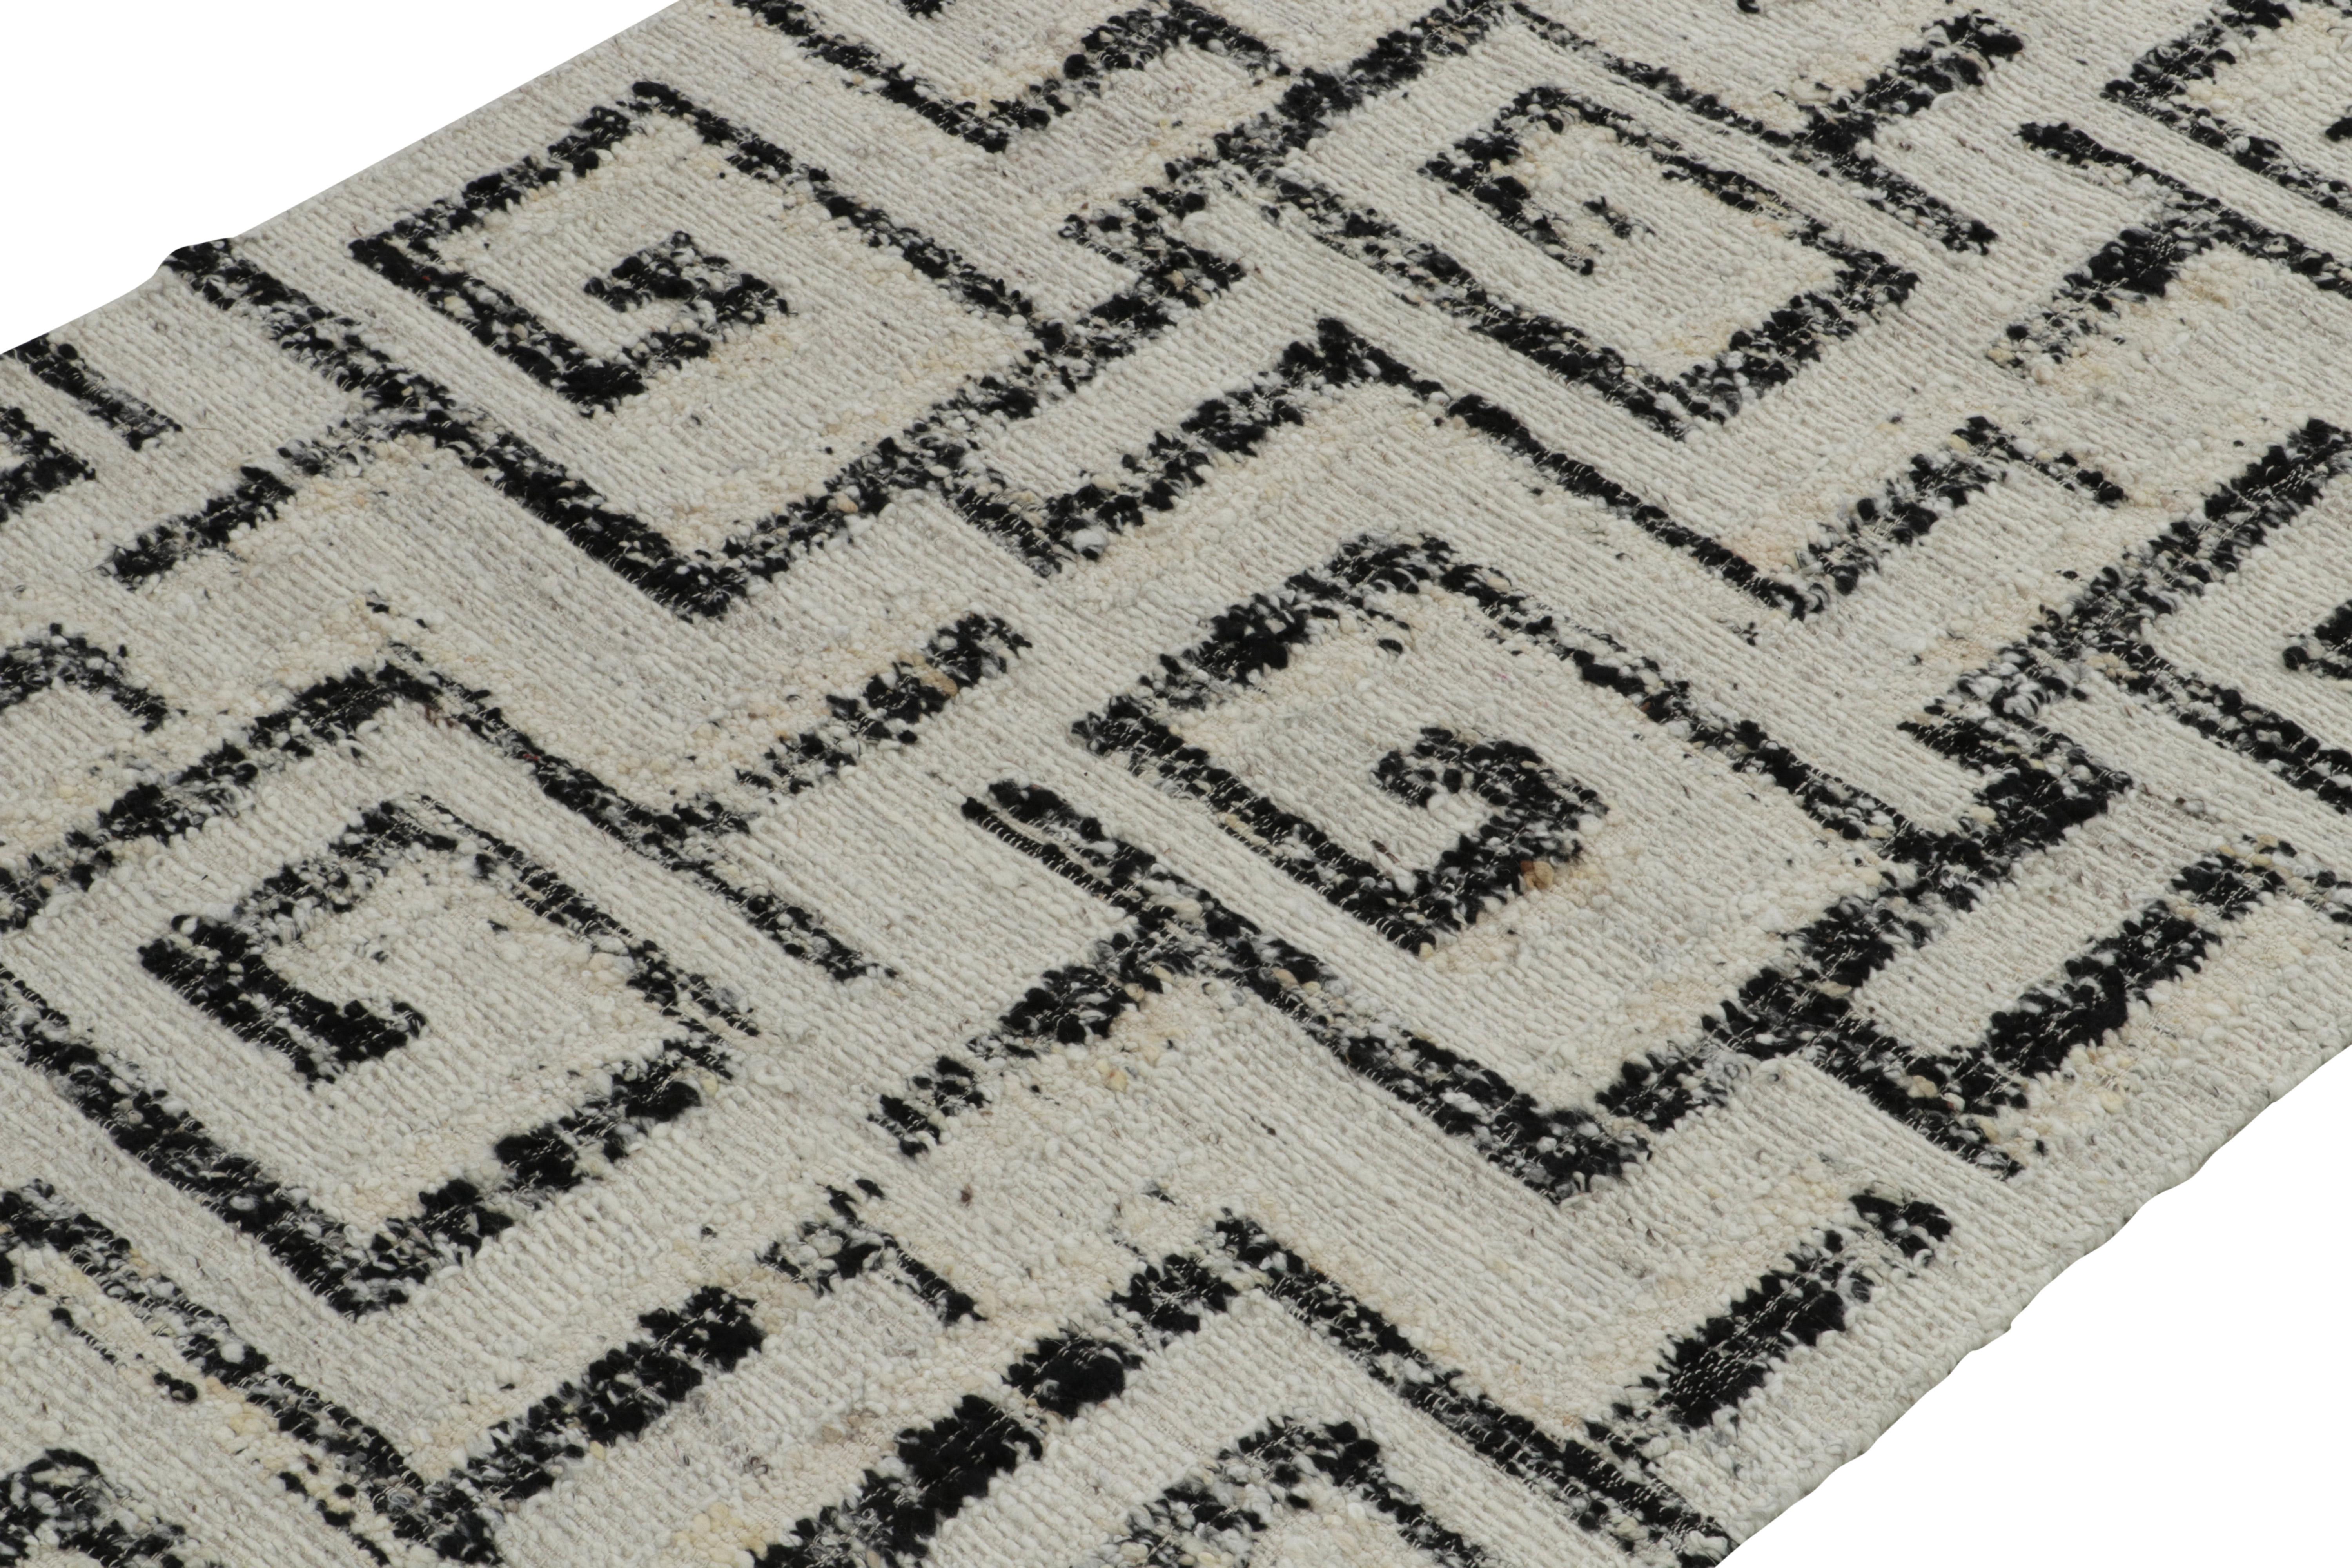 Indian Rug & Kilim's Contemporary Kilim Rug in Ivory, Charcoal Black Deco Pattern For Sale